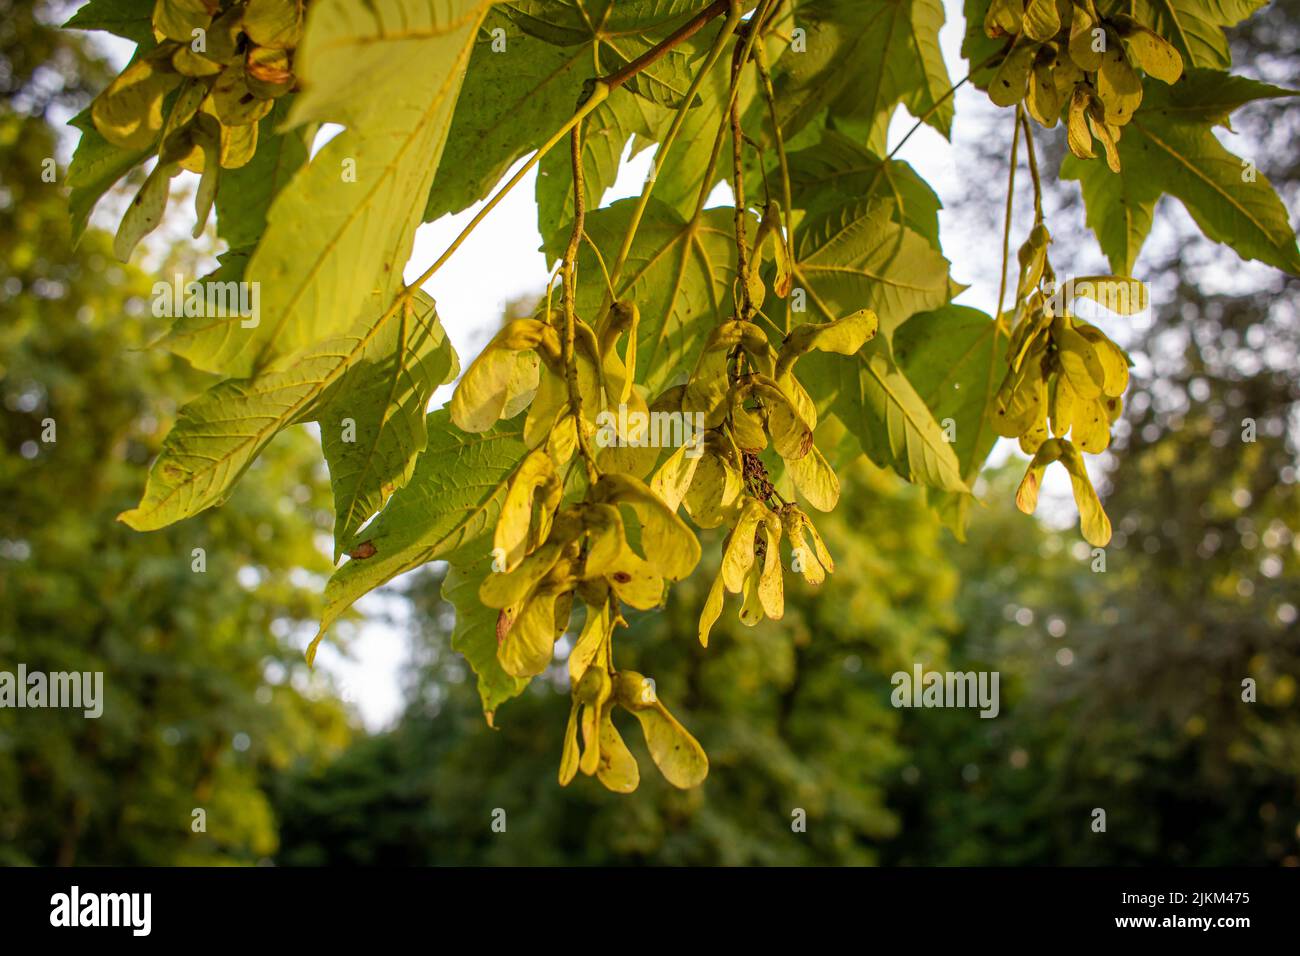 Fruits of Norway maple (Acer platanoides) in a park in late summer in the evening light Stock Photo